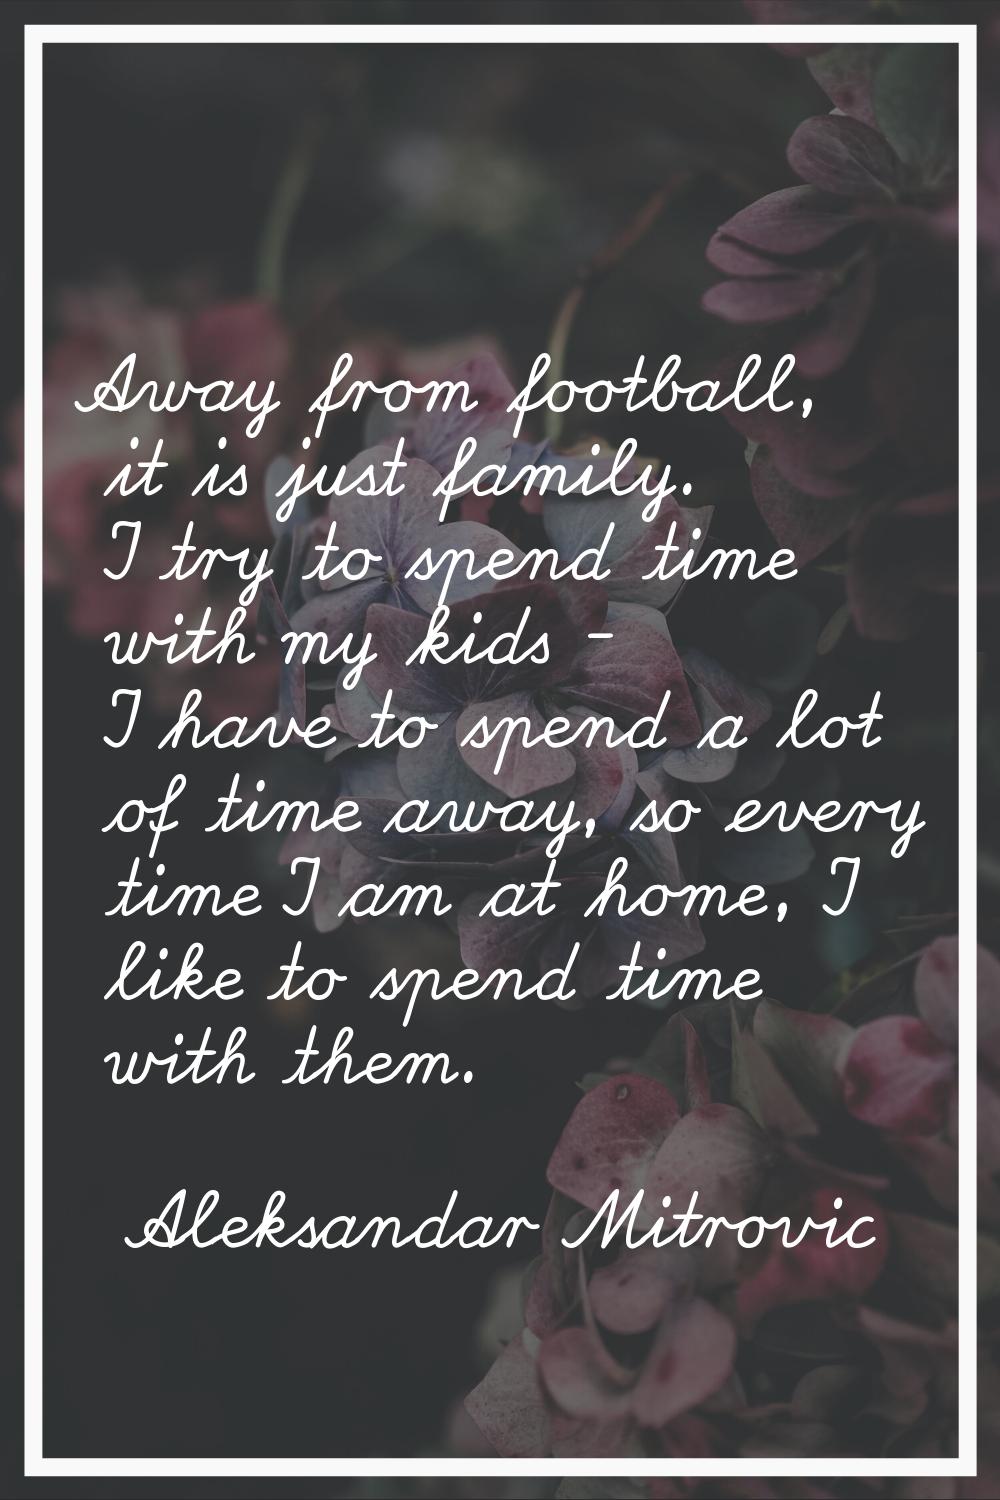 Away from football, it is just family. I try to spend time with my kids - I have to spend a lot of 